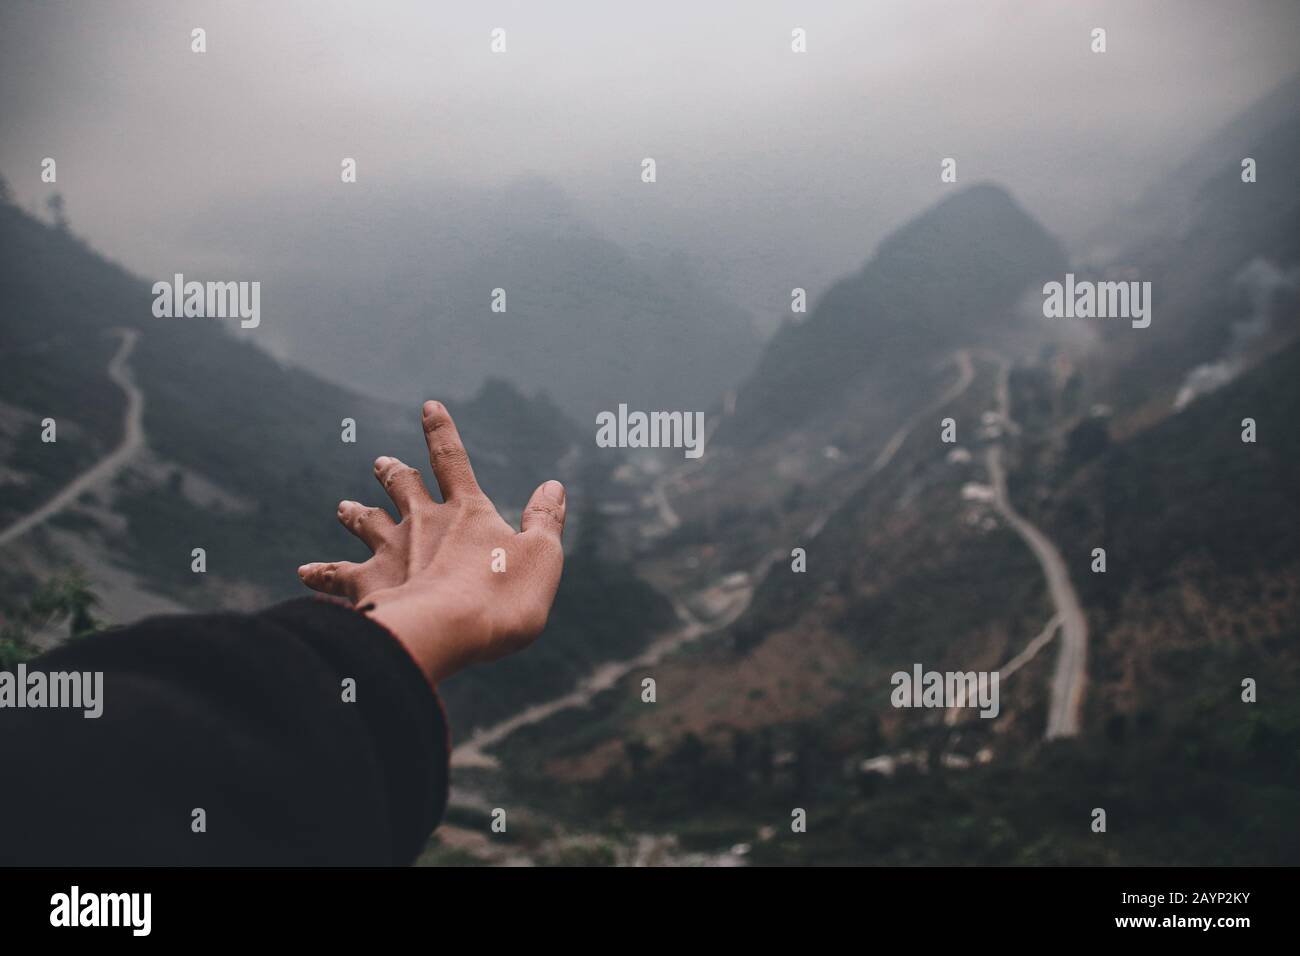 A hand reaching out to the foggy mountains and winding roads of Ha giang Loop in Vietnam showing a cinematic and moody travel photo Stock Photo